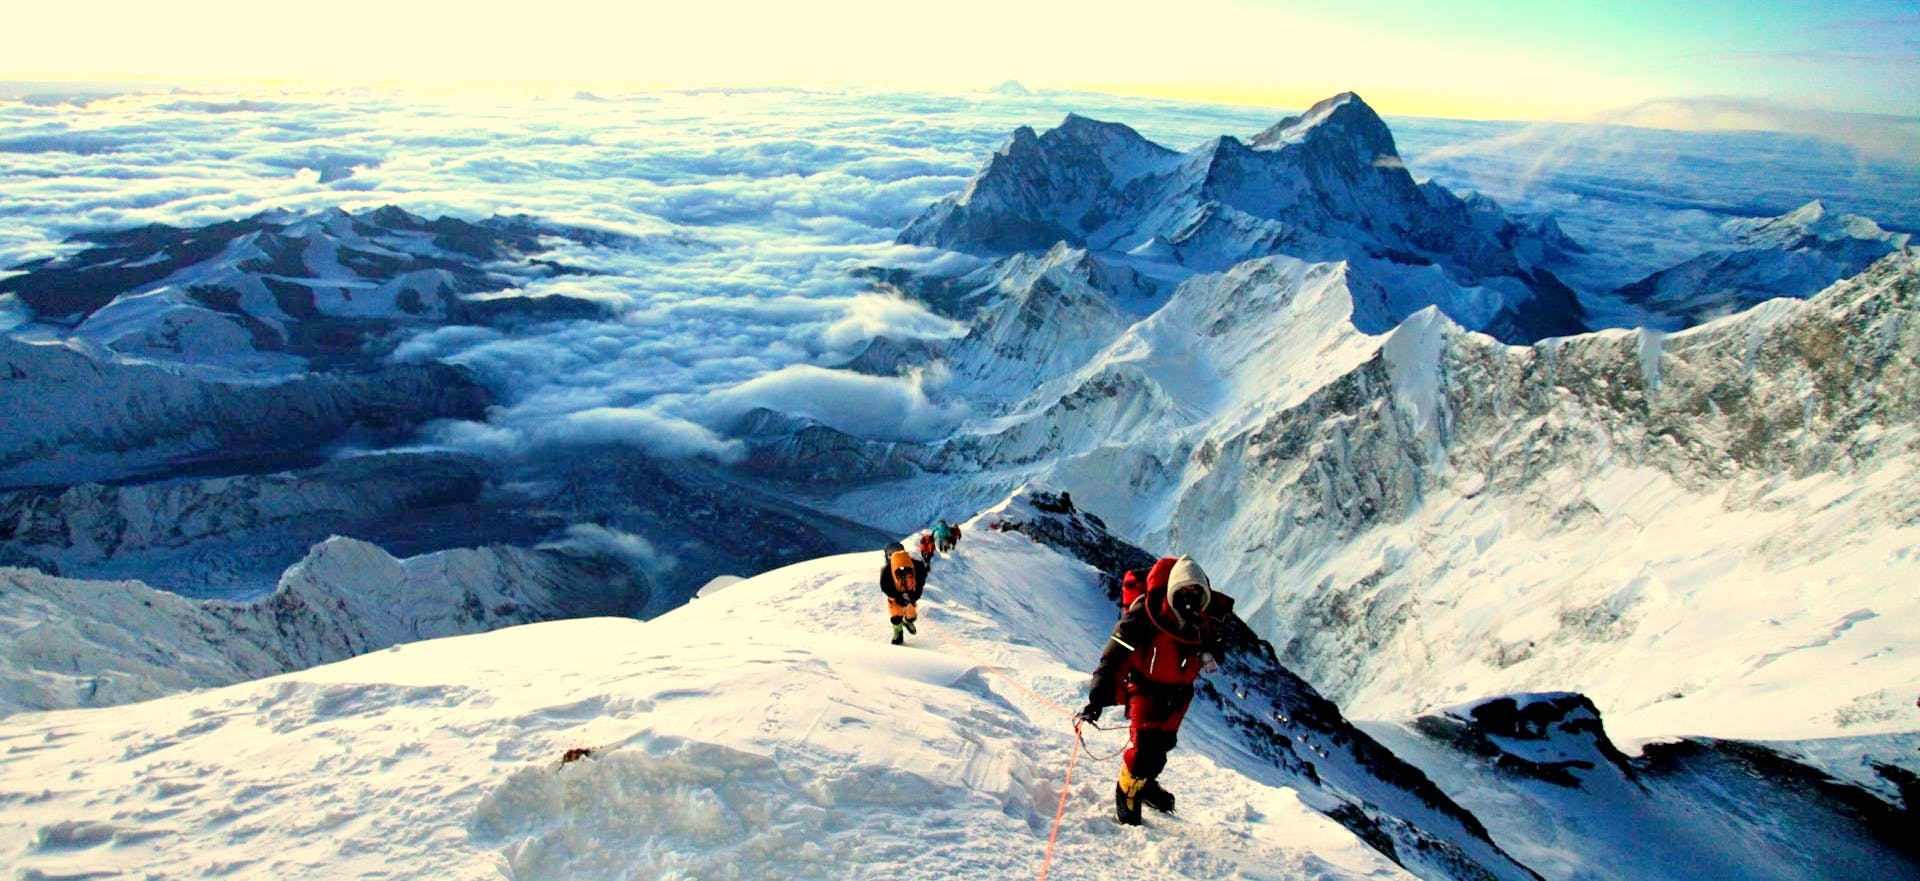 Things you should know before climbing peak in Nepal